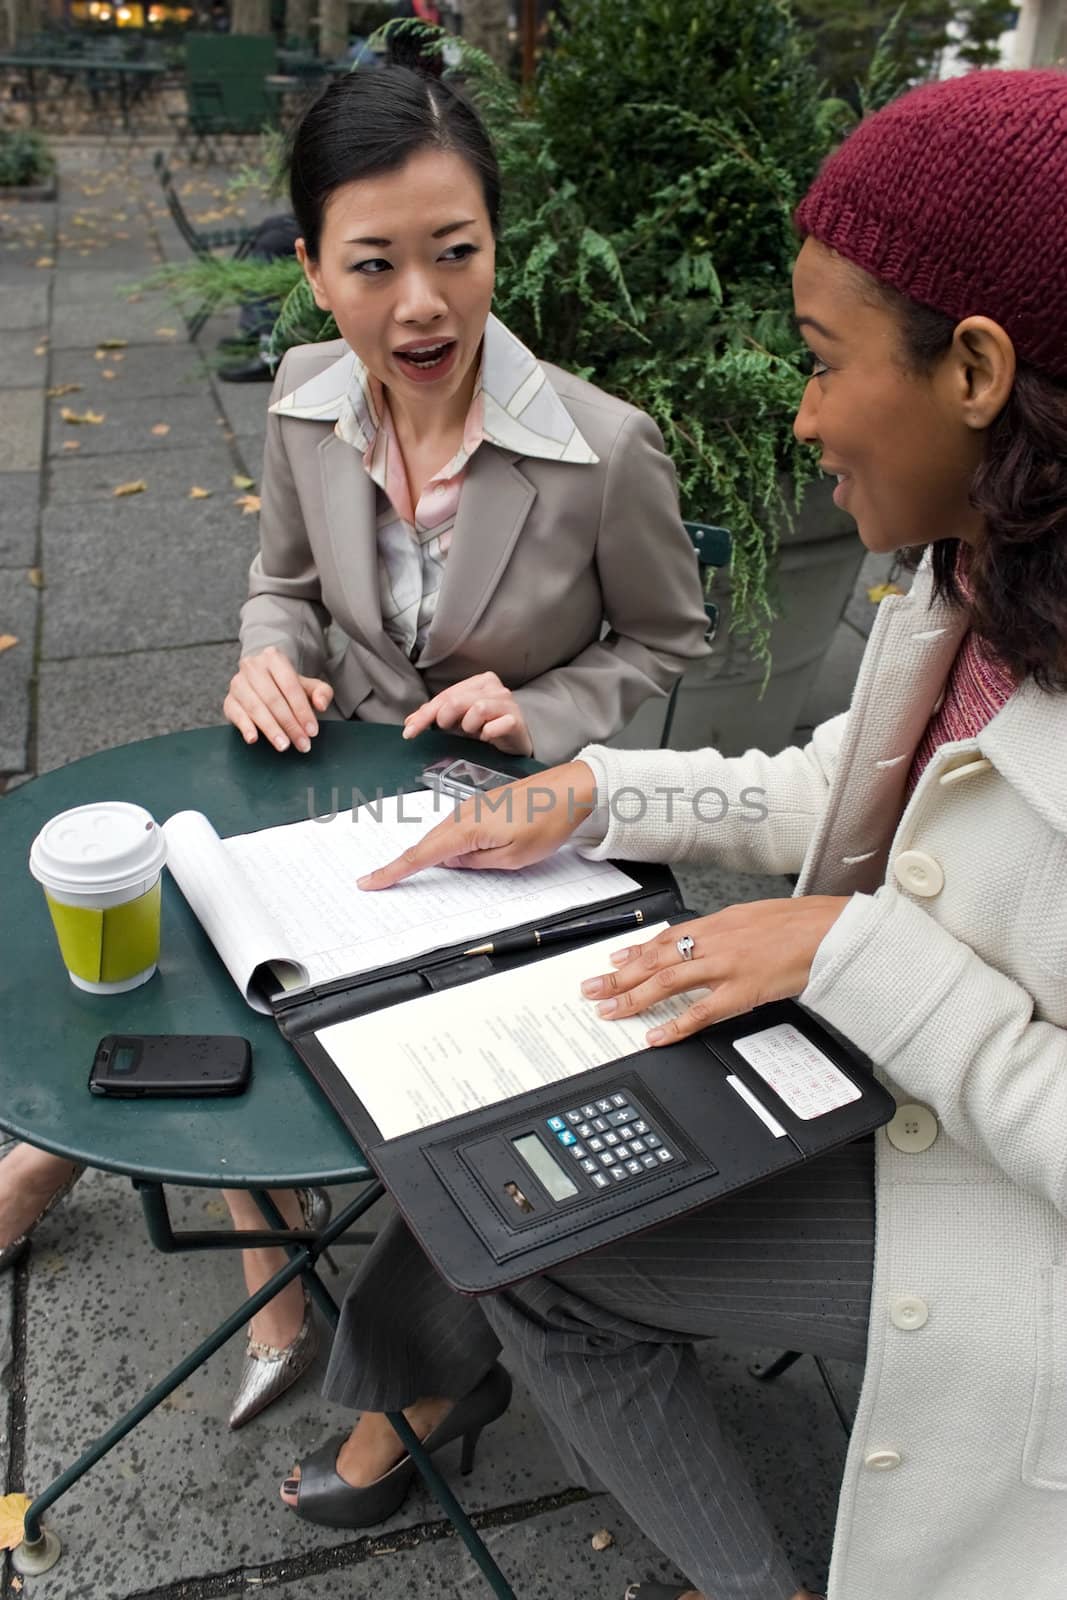 Two young business women discussing a group or team project in the park.